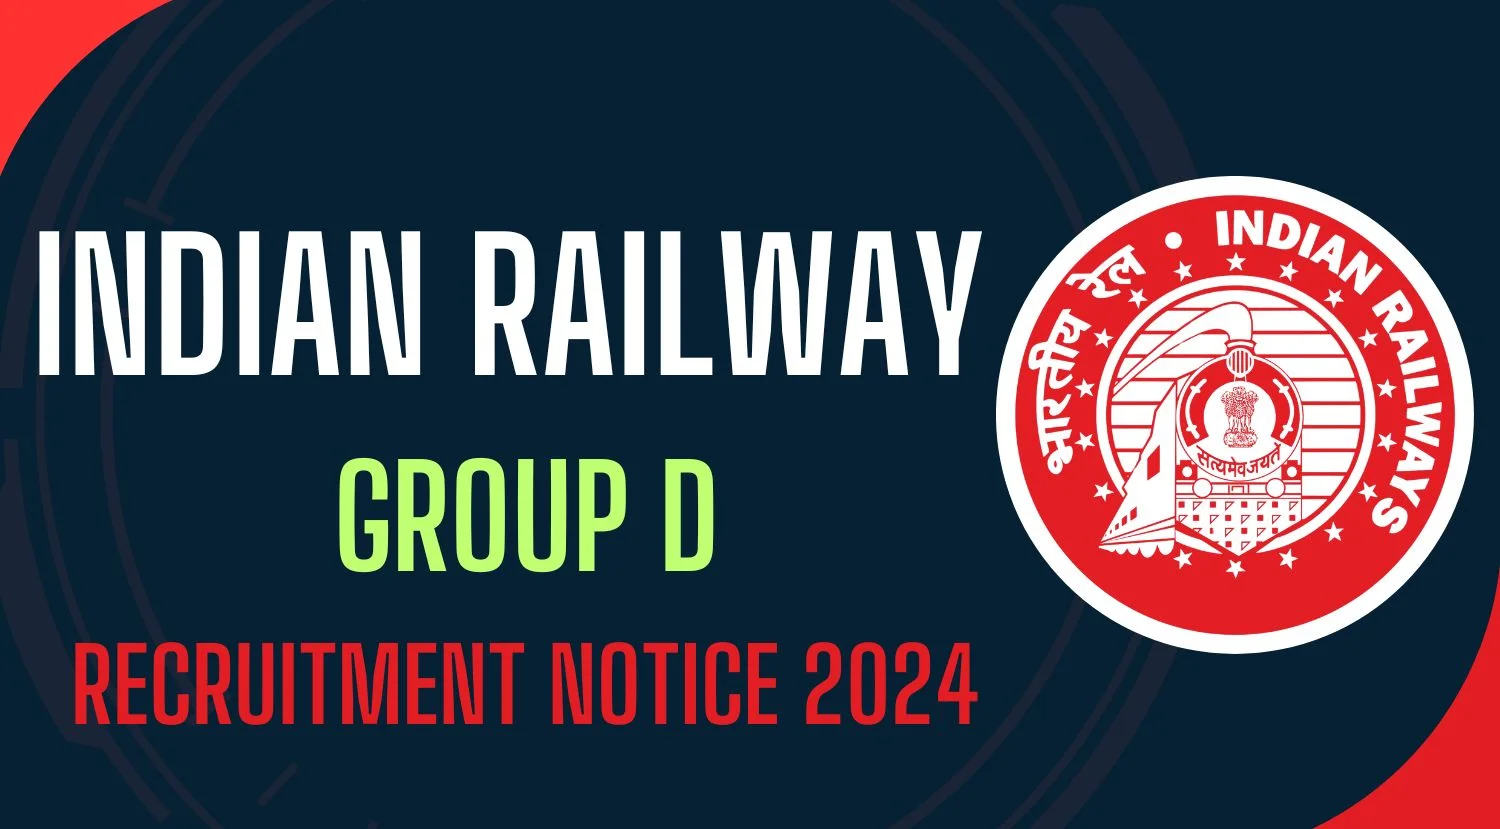 Northern Railway Recruitment 2024 Group D Recruitment 2024 Notification Out Apply Now